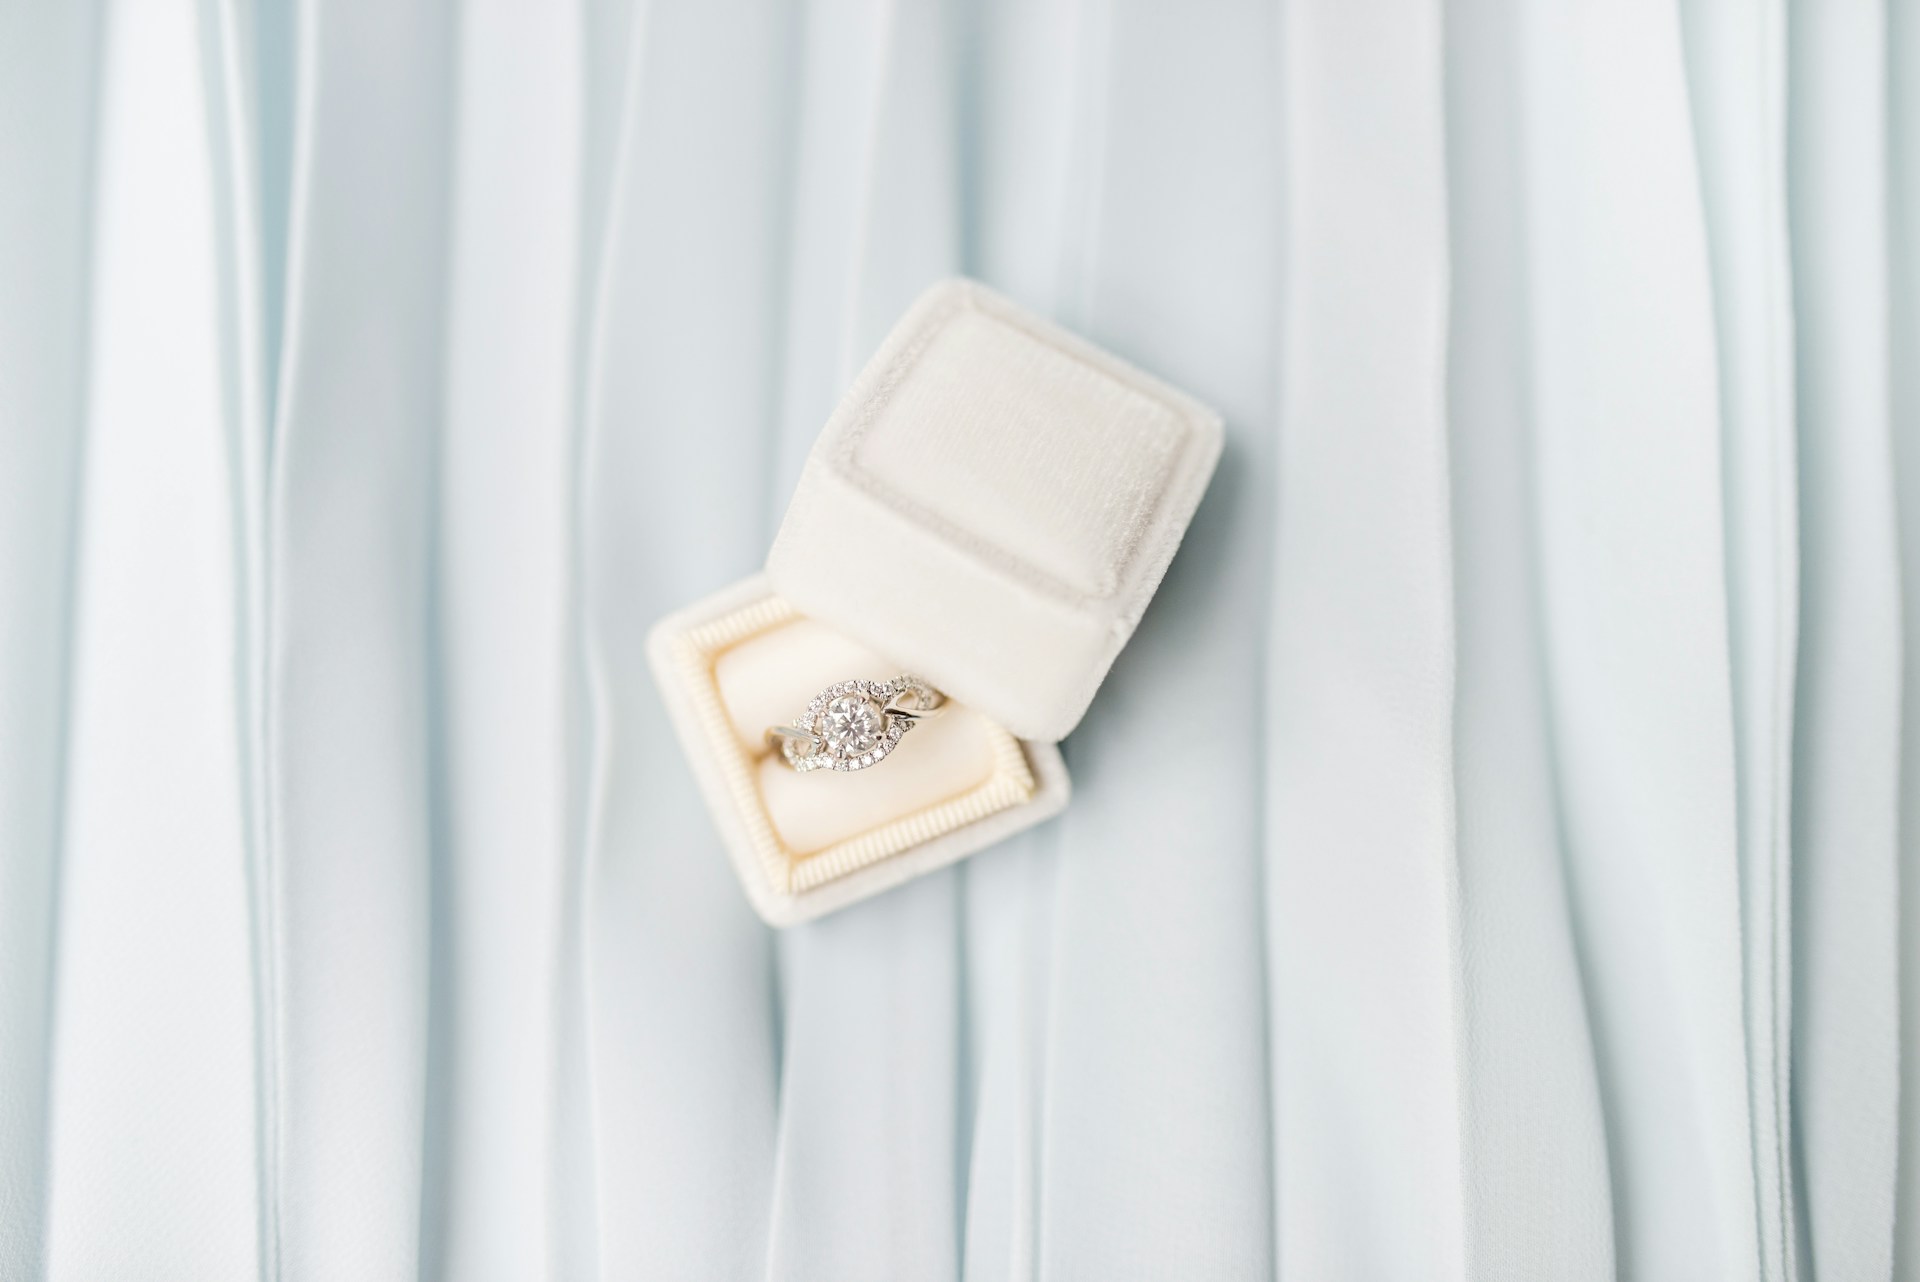 a diamond engagement ring in a white jewelry box on a light blue background